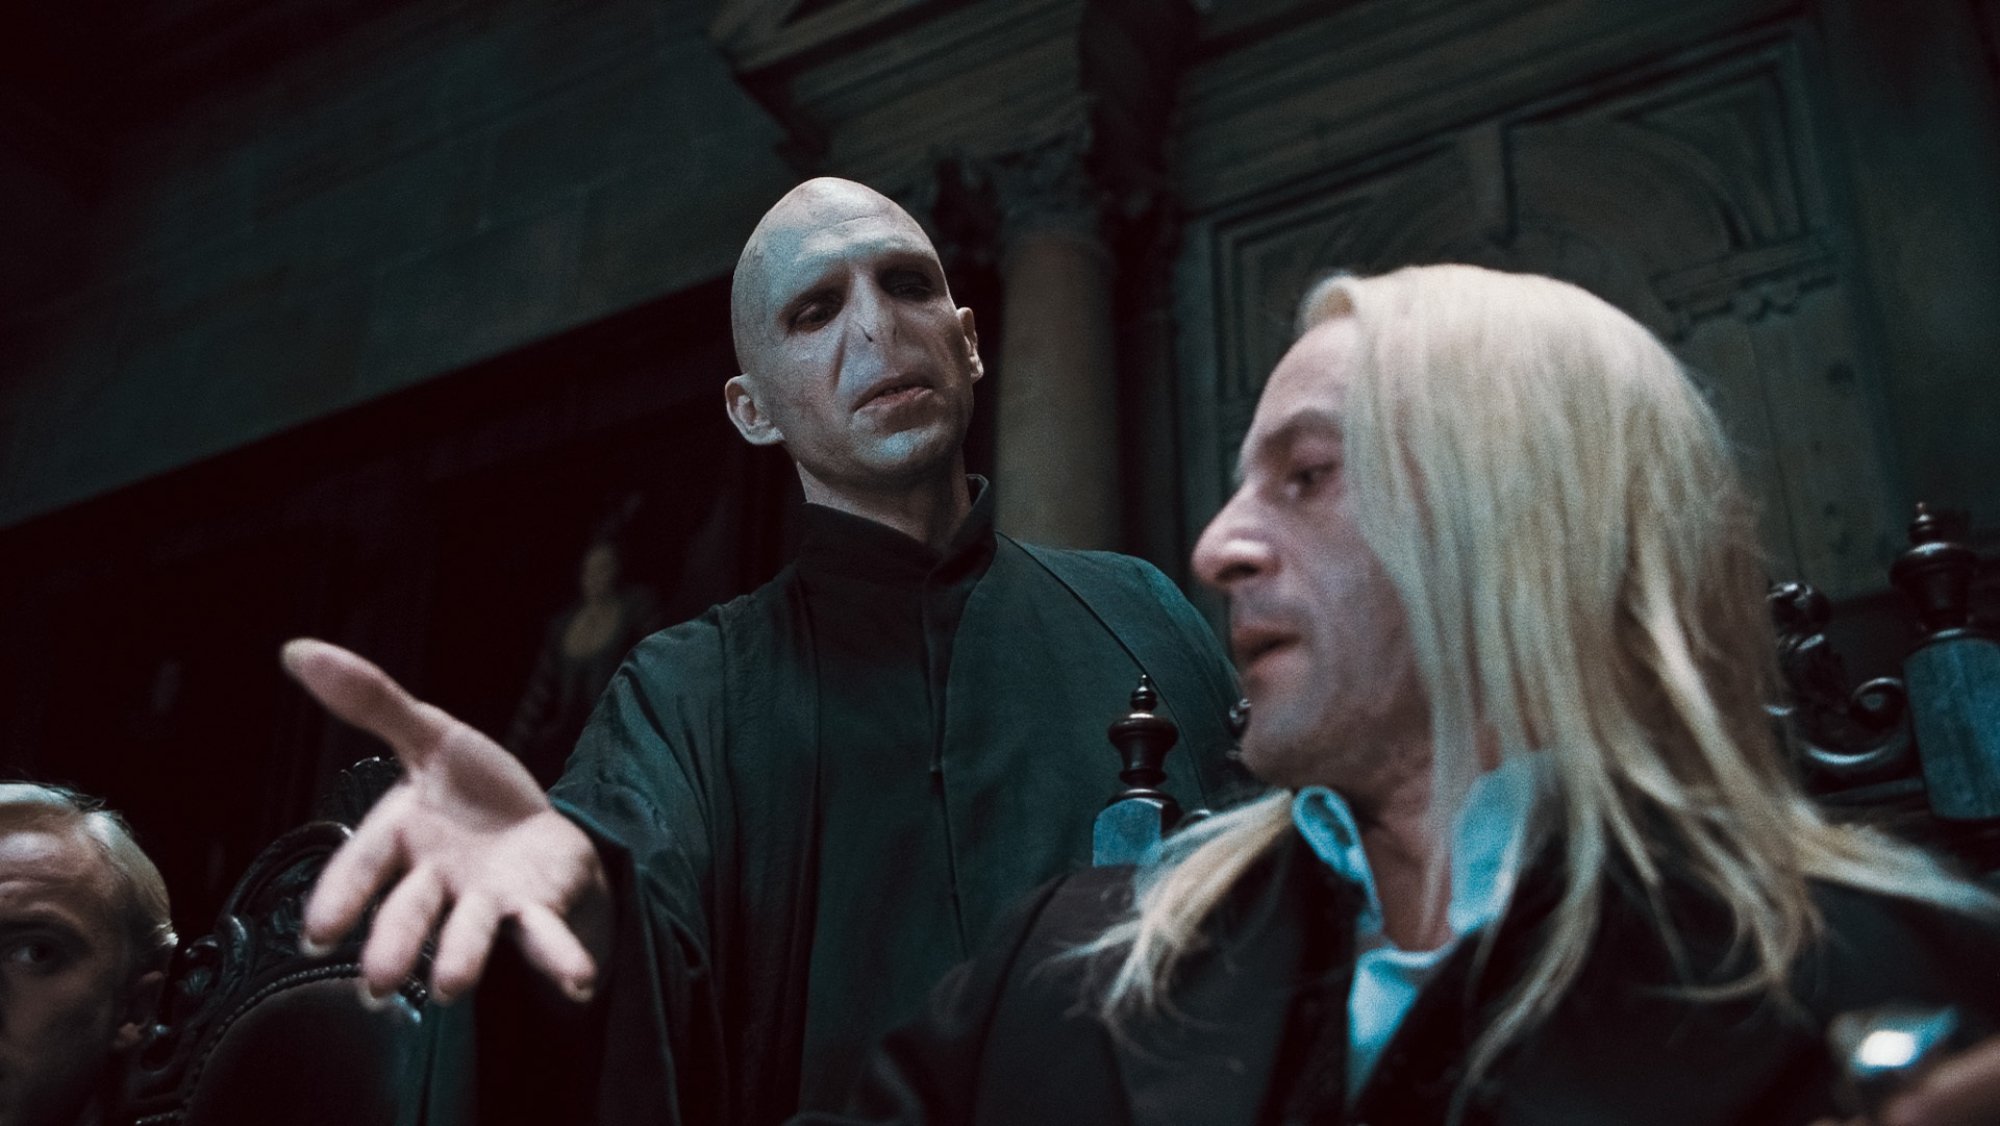 'Harry Potter' Tom Felton as Draco Malfoy, Ralph Fiennes as Voldemort, and Jason Isaacs as Lucius Malfoy near extravagant-looking chairs with Voldemort holding his hand out